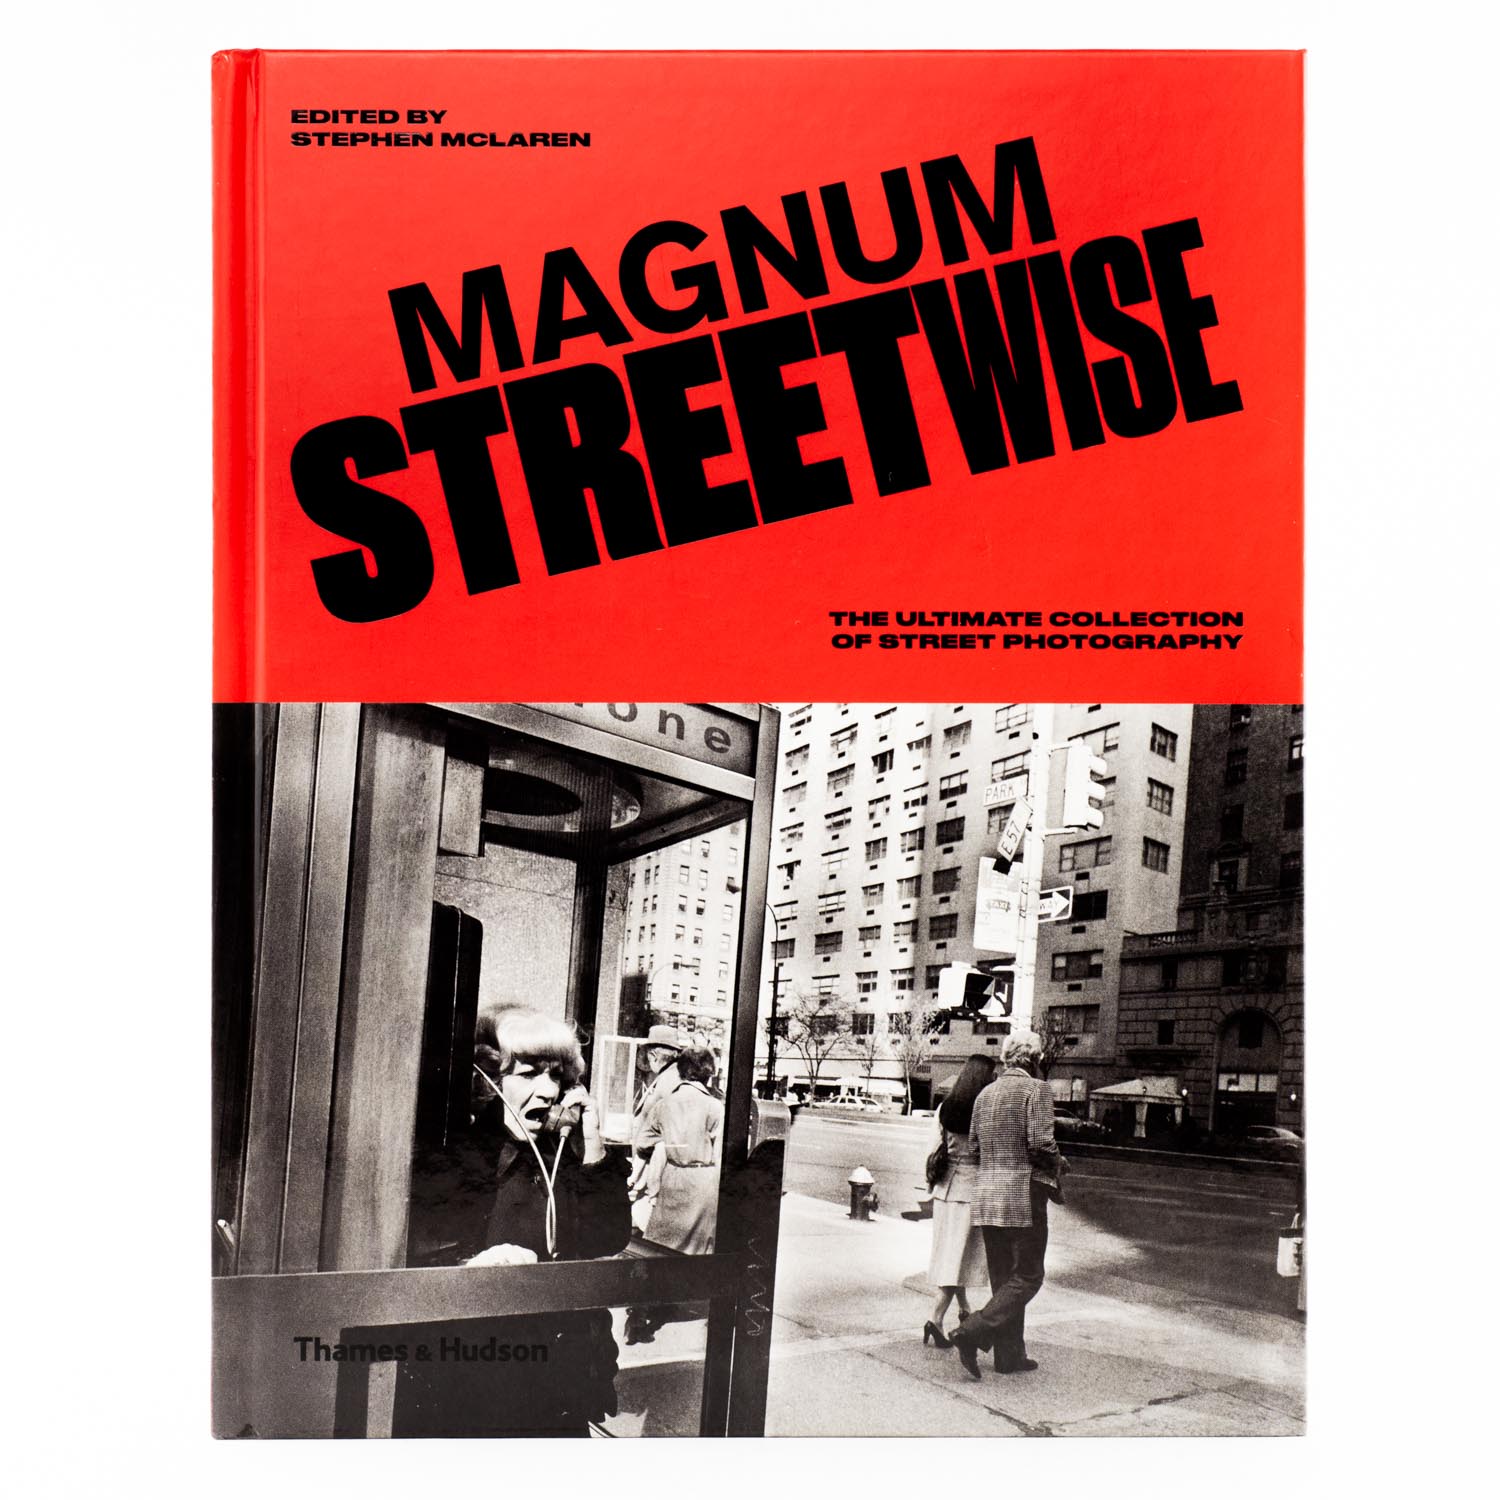 TThumbnail image for MAGNUM STREETWISE - EDITED BY STEVEN MCLAREN